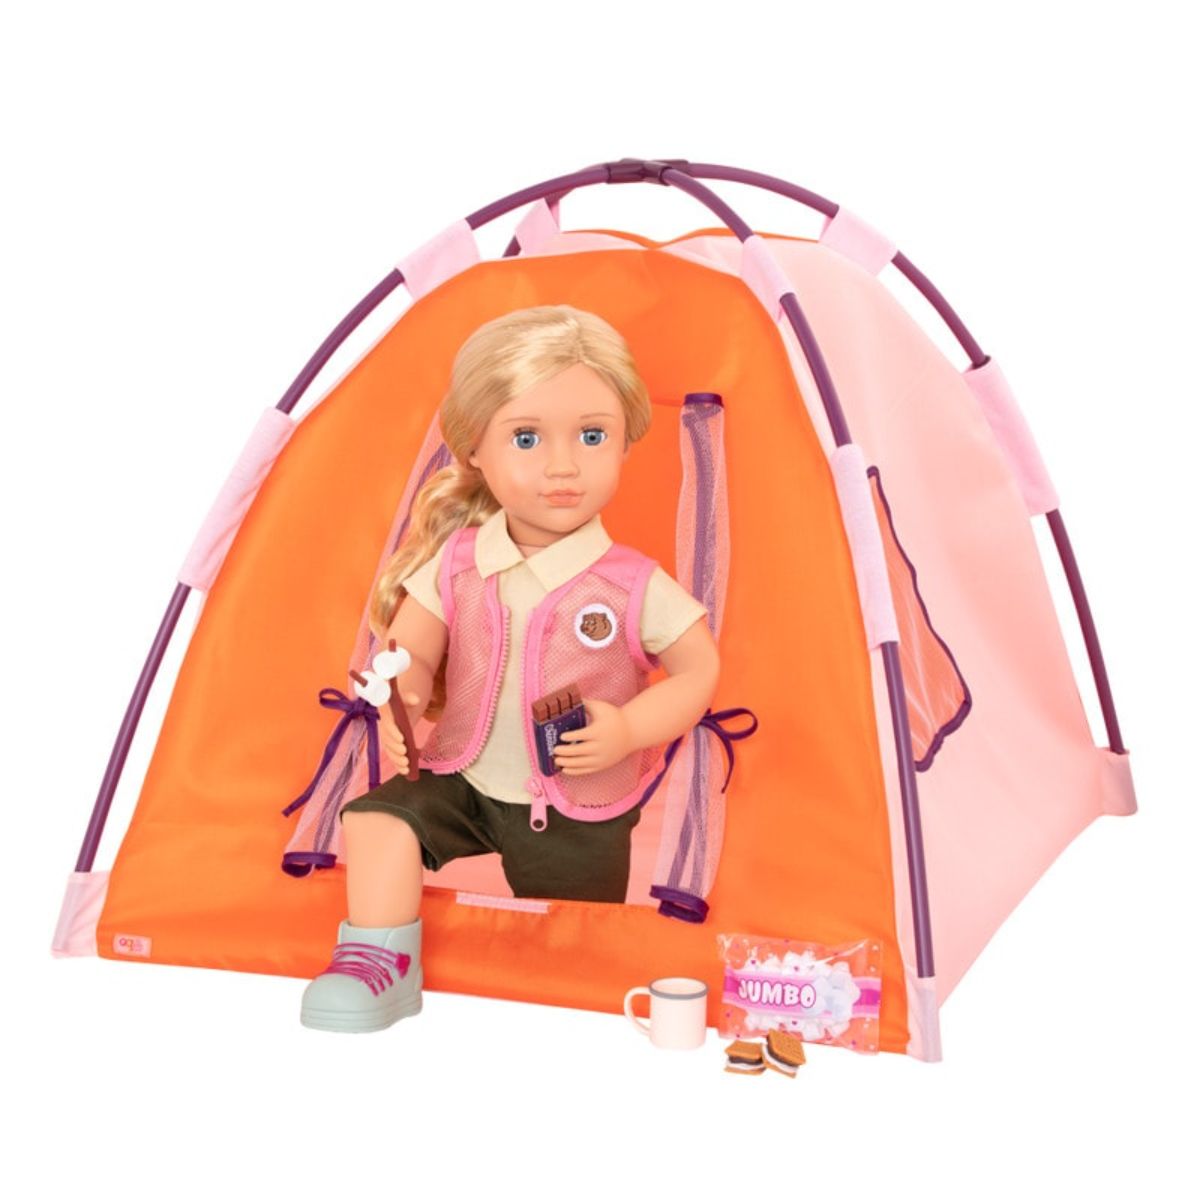 Camping Tent Set W/ S’Mores